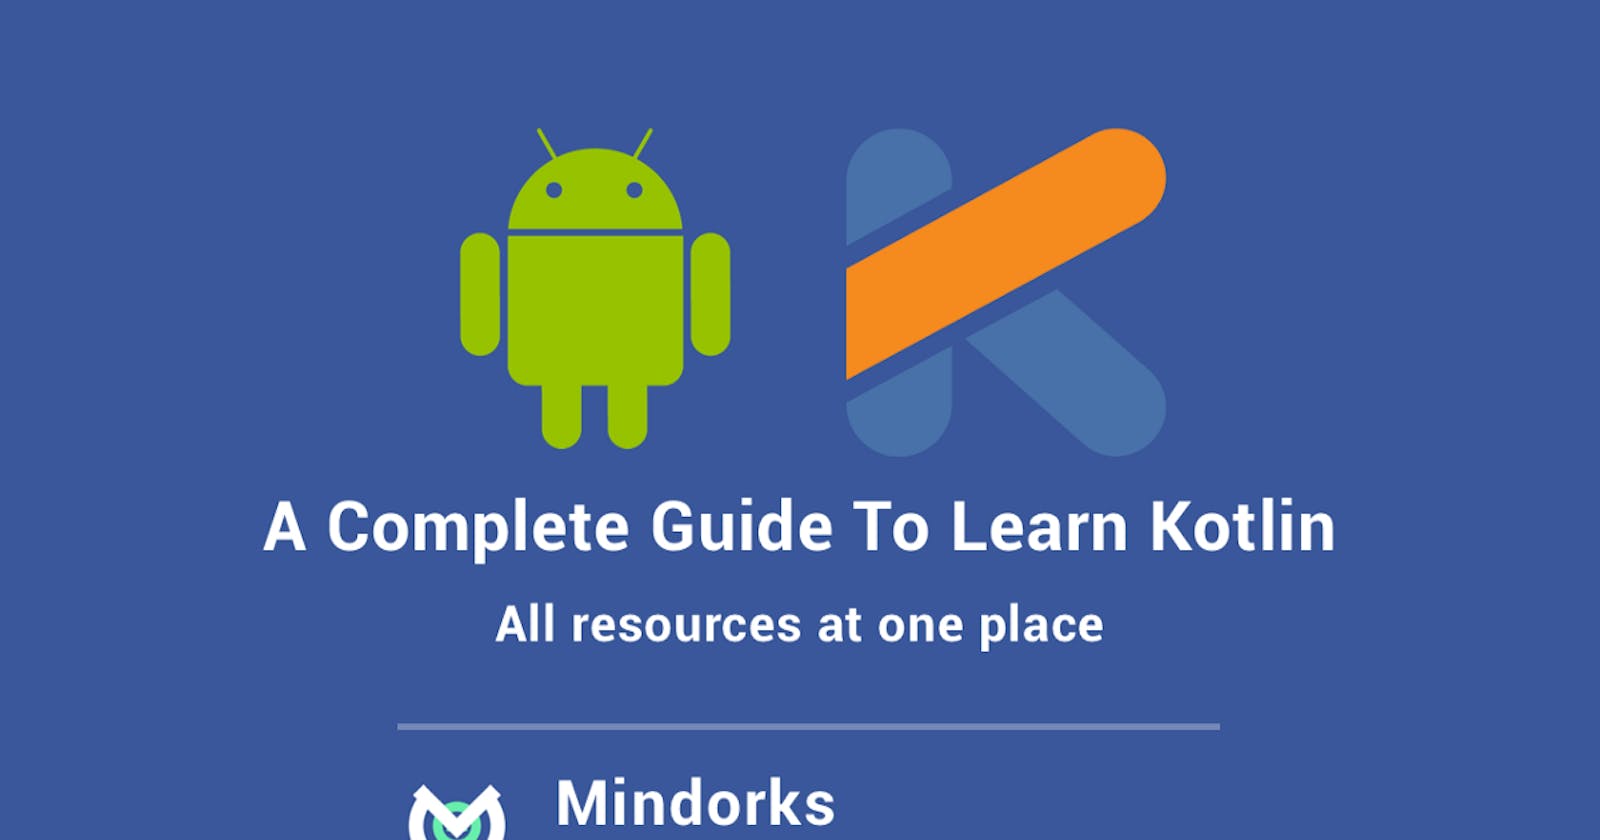 A Complete Guide To Learn Kotlin For Android Development